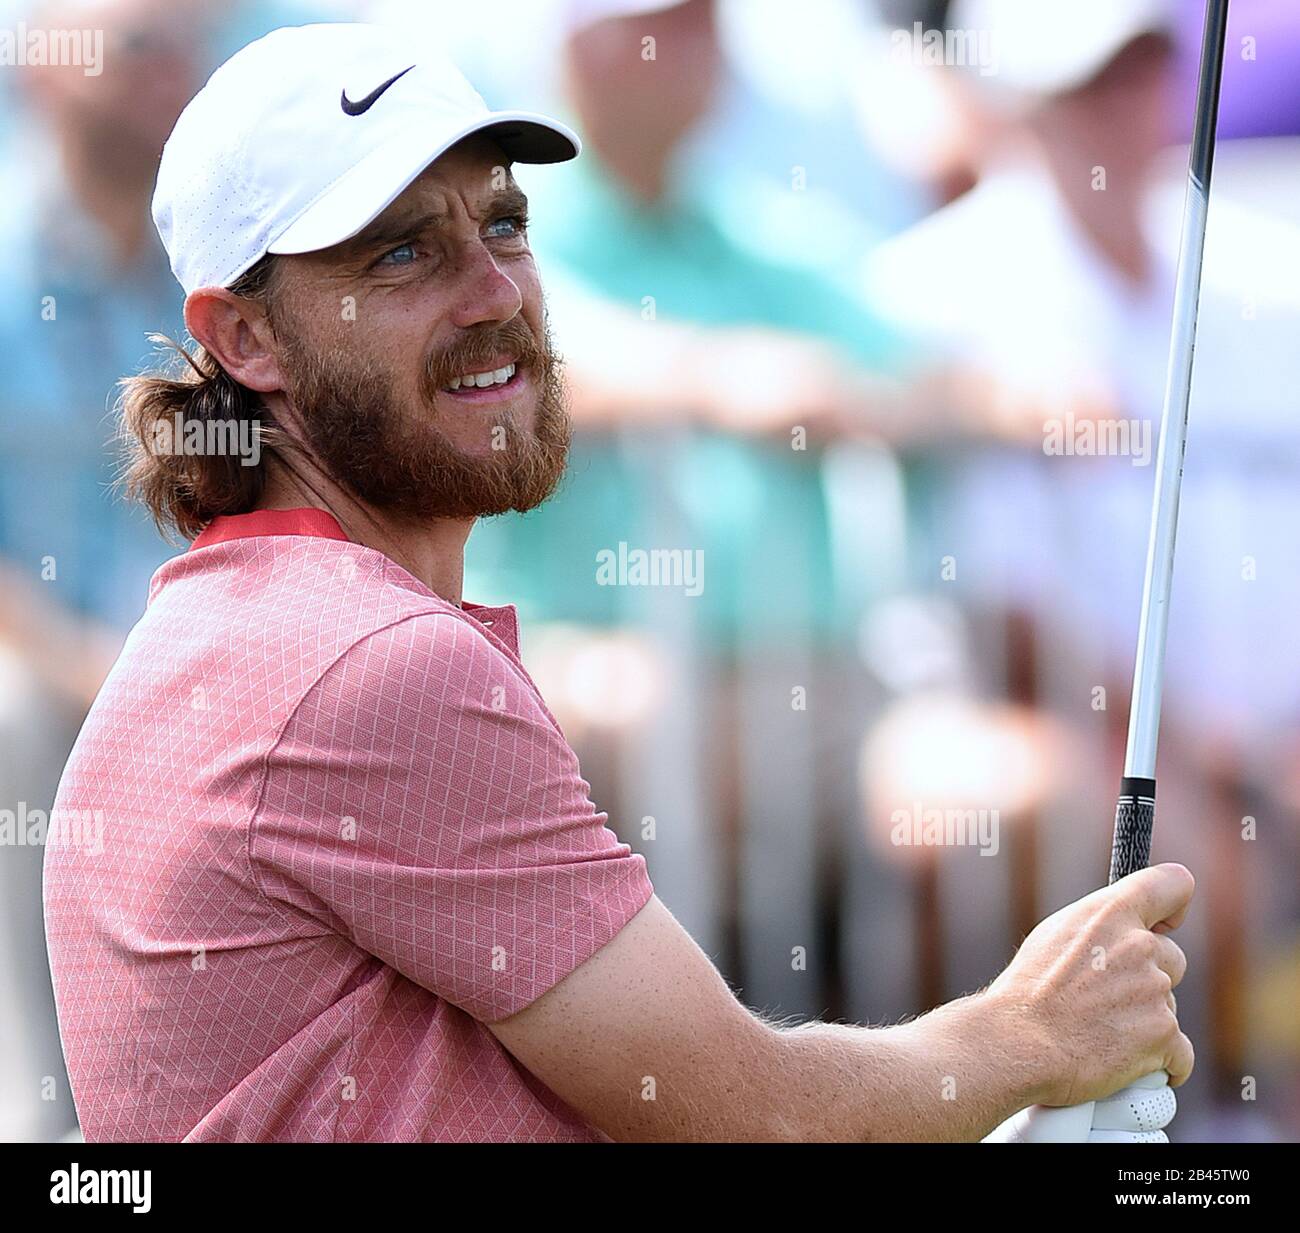 Orlando, United States. 05th Mar, 2020. March 5, 2020 - Orlando, Florida, United States - Tommy Fleetwood of England tees off on the first hole during the first round of the Arnold Palmer Invitational golf tournament at the Bay Hill Club & Lodge on March 5, 2020 in Orlando, Florida. Credit: Paul Hennessy/Alamy Live News Stock Photo